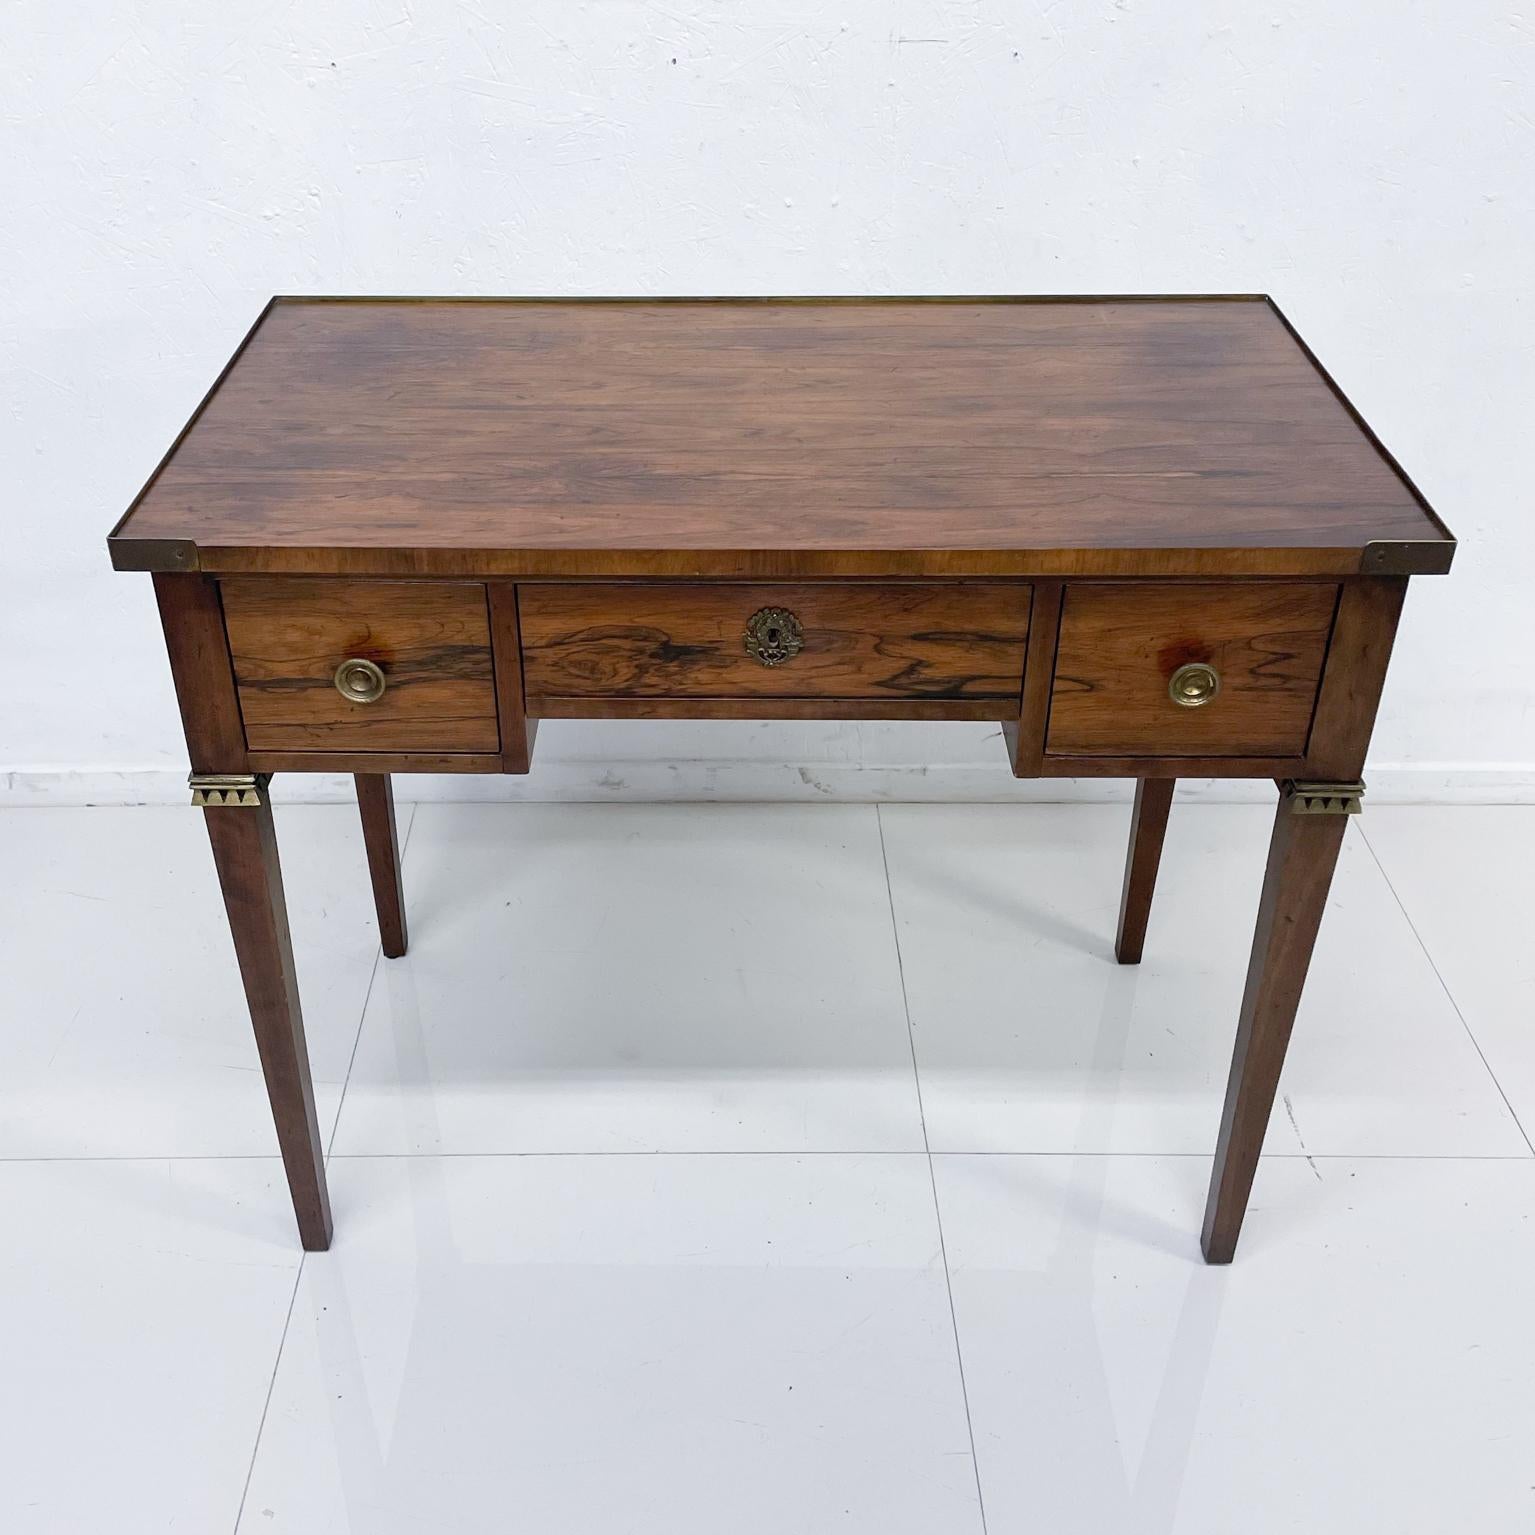 For your consideration: Elegant Regency finely crafted small writing desk in rosewood and bronze.
Entry receiving table. Key included for desk.
Retains Label BAKER in top drawer. Designed by Michael Taylor for Baker Furniture
Measures: 19 D x 36 W x